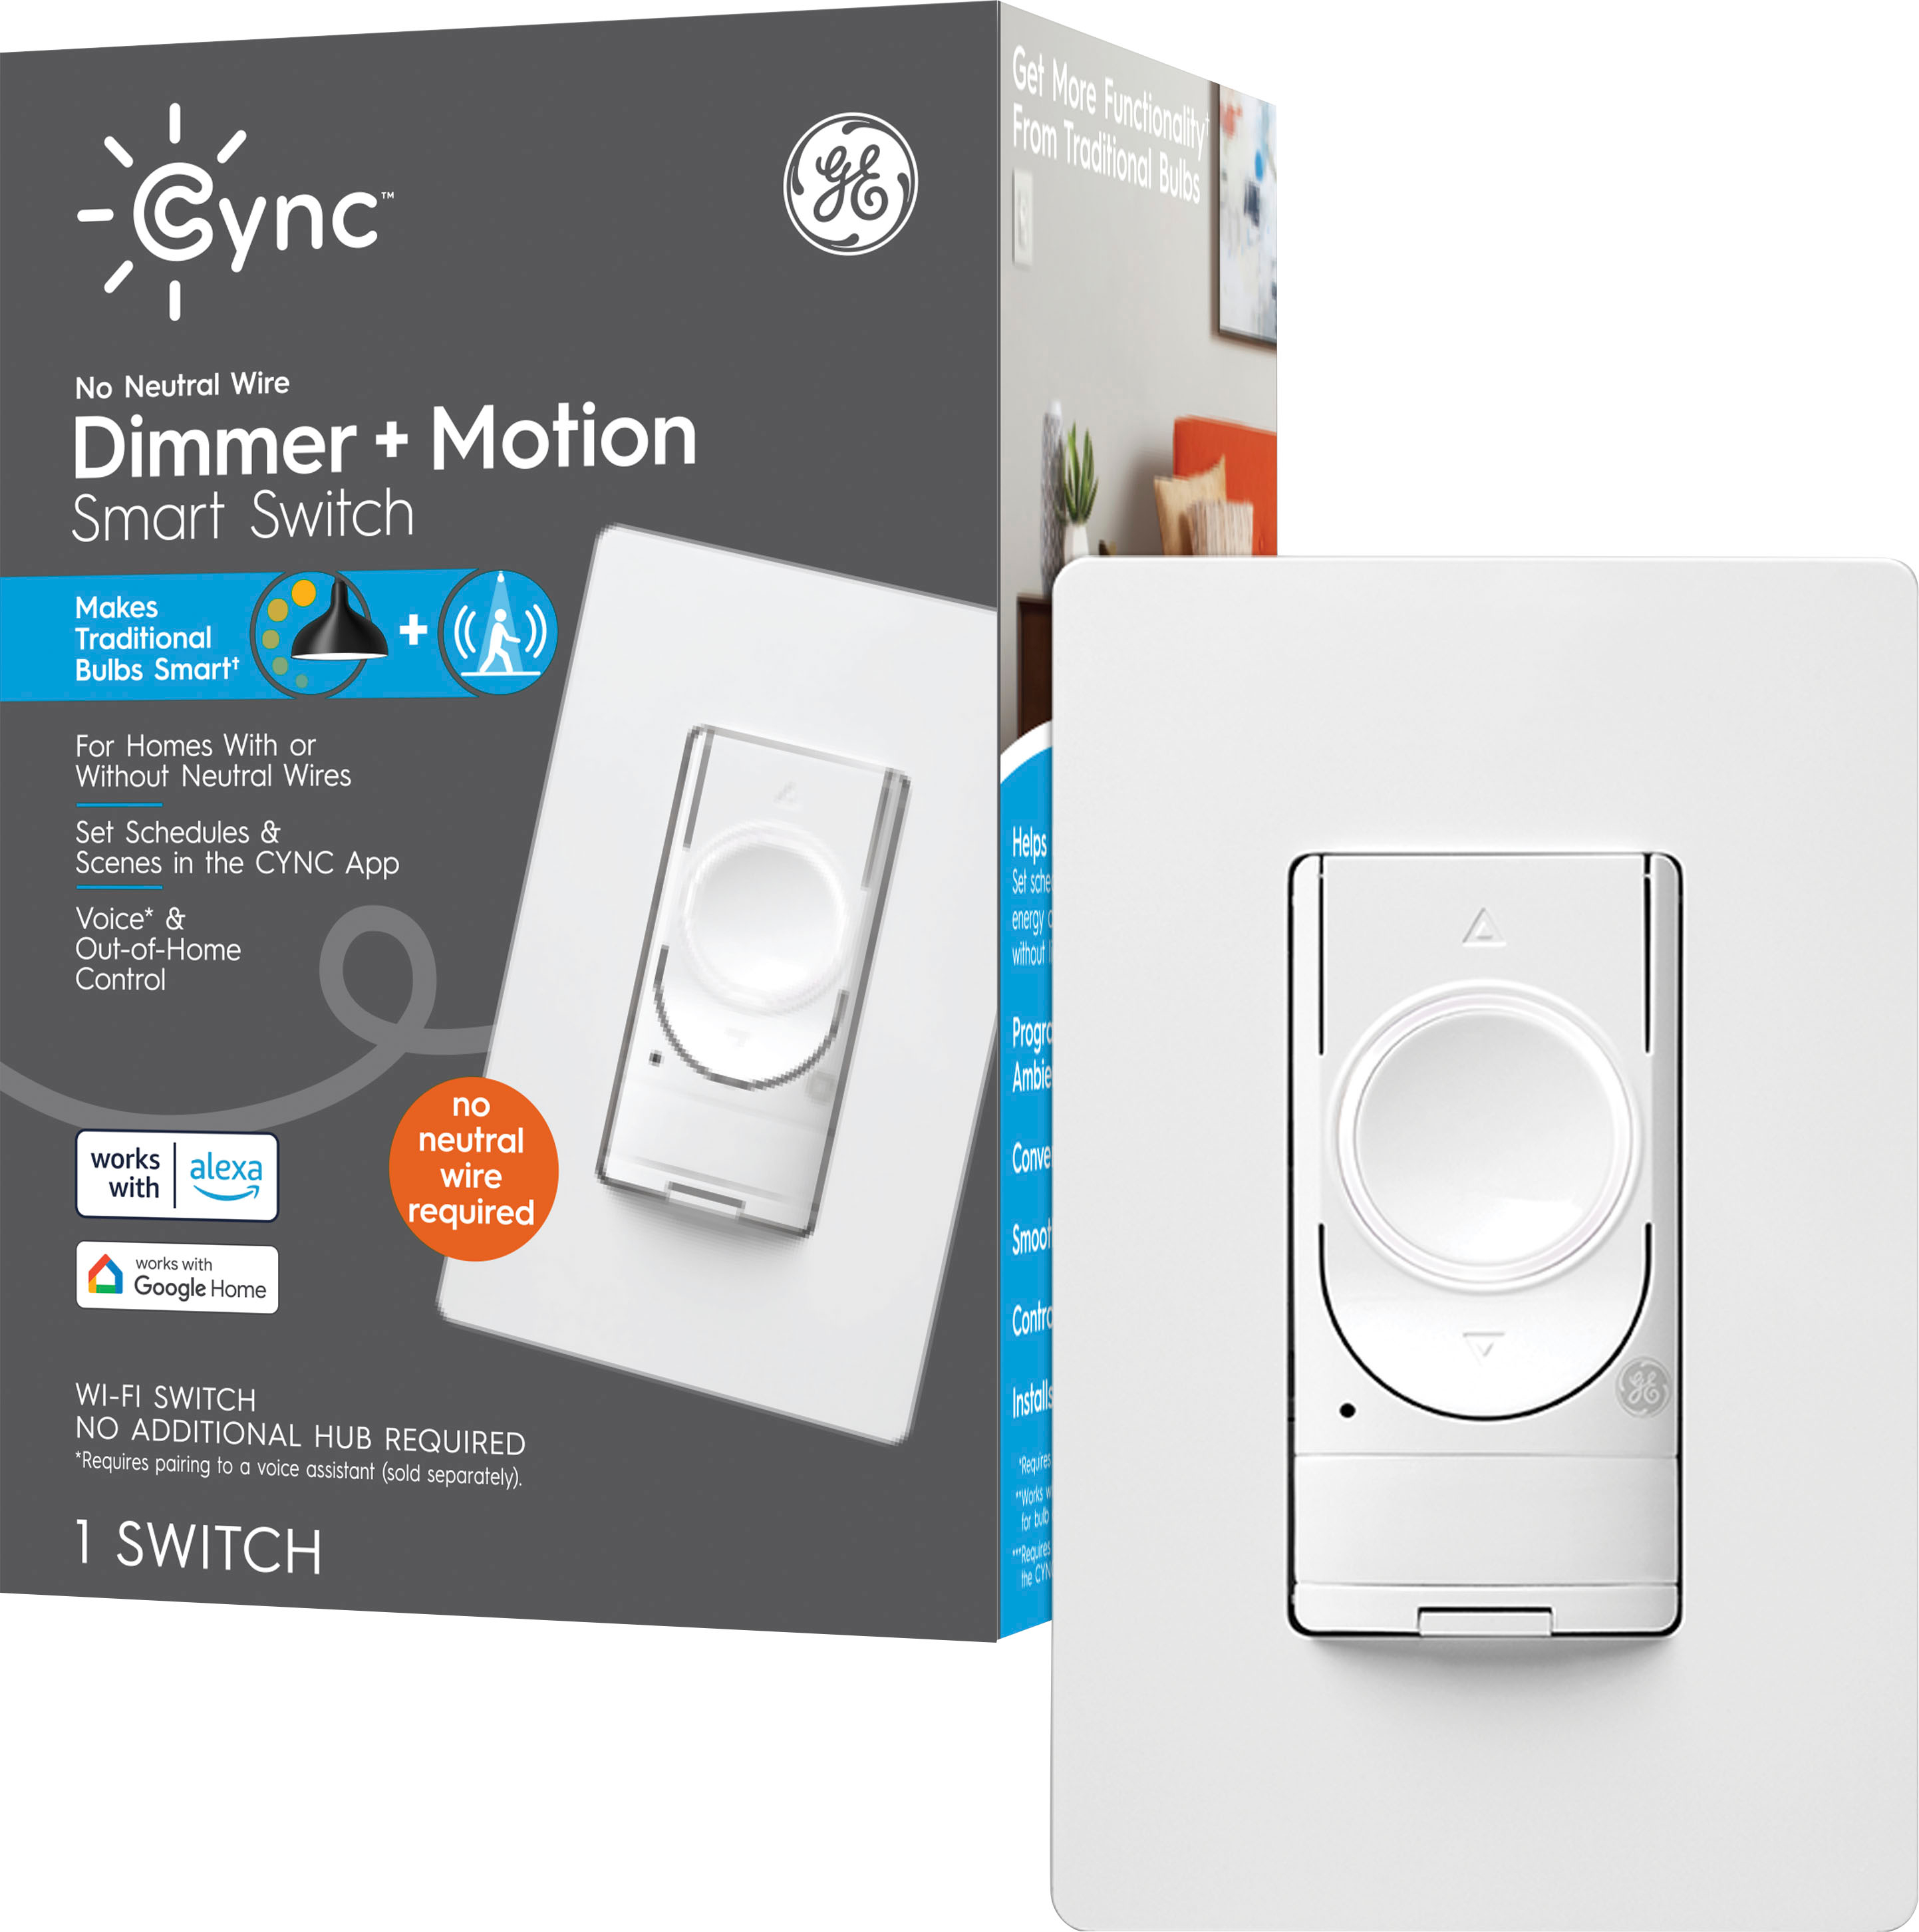 GE CYNC Dimmer + Motion Sensor Smart Switch, No Neutral Wire Required,  Bluetooth and 2.4 GHz Wifi (Packing May Vary) White 93120076 - Best Buy